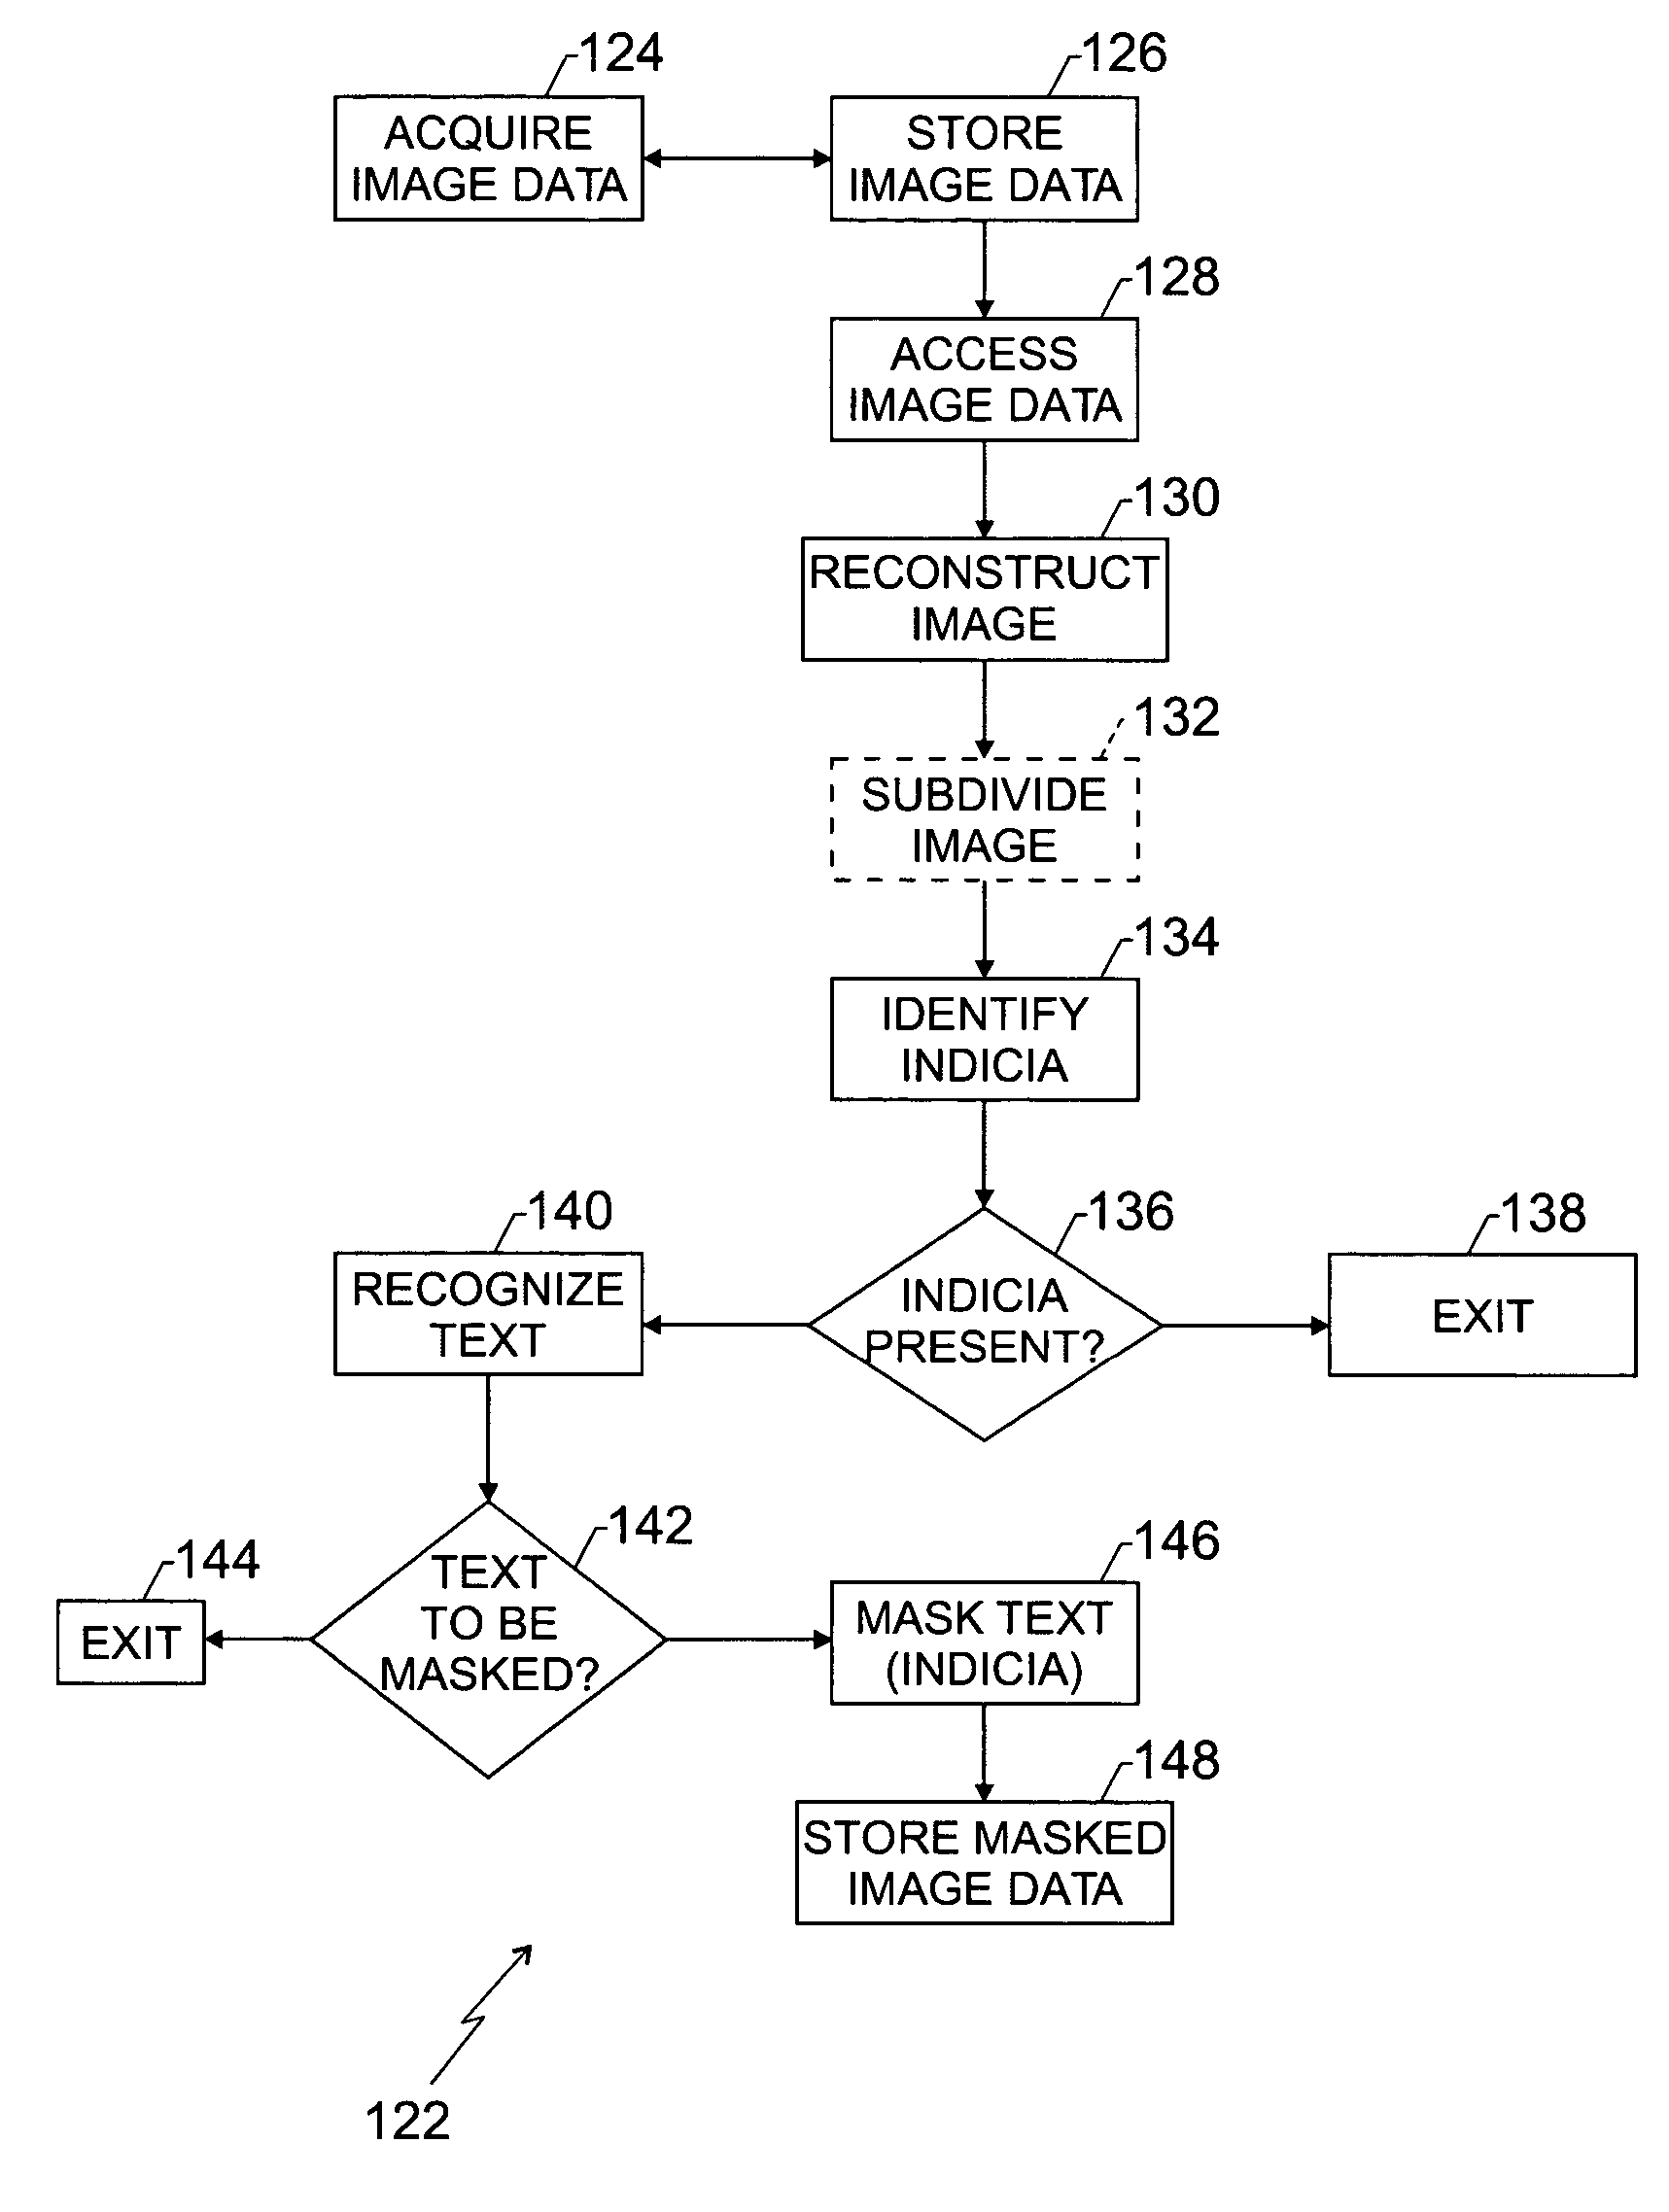 Image-based indicia obfuscation system and method